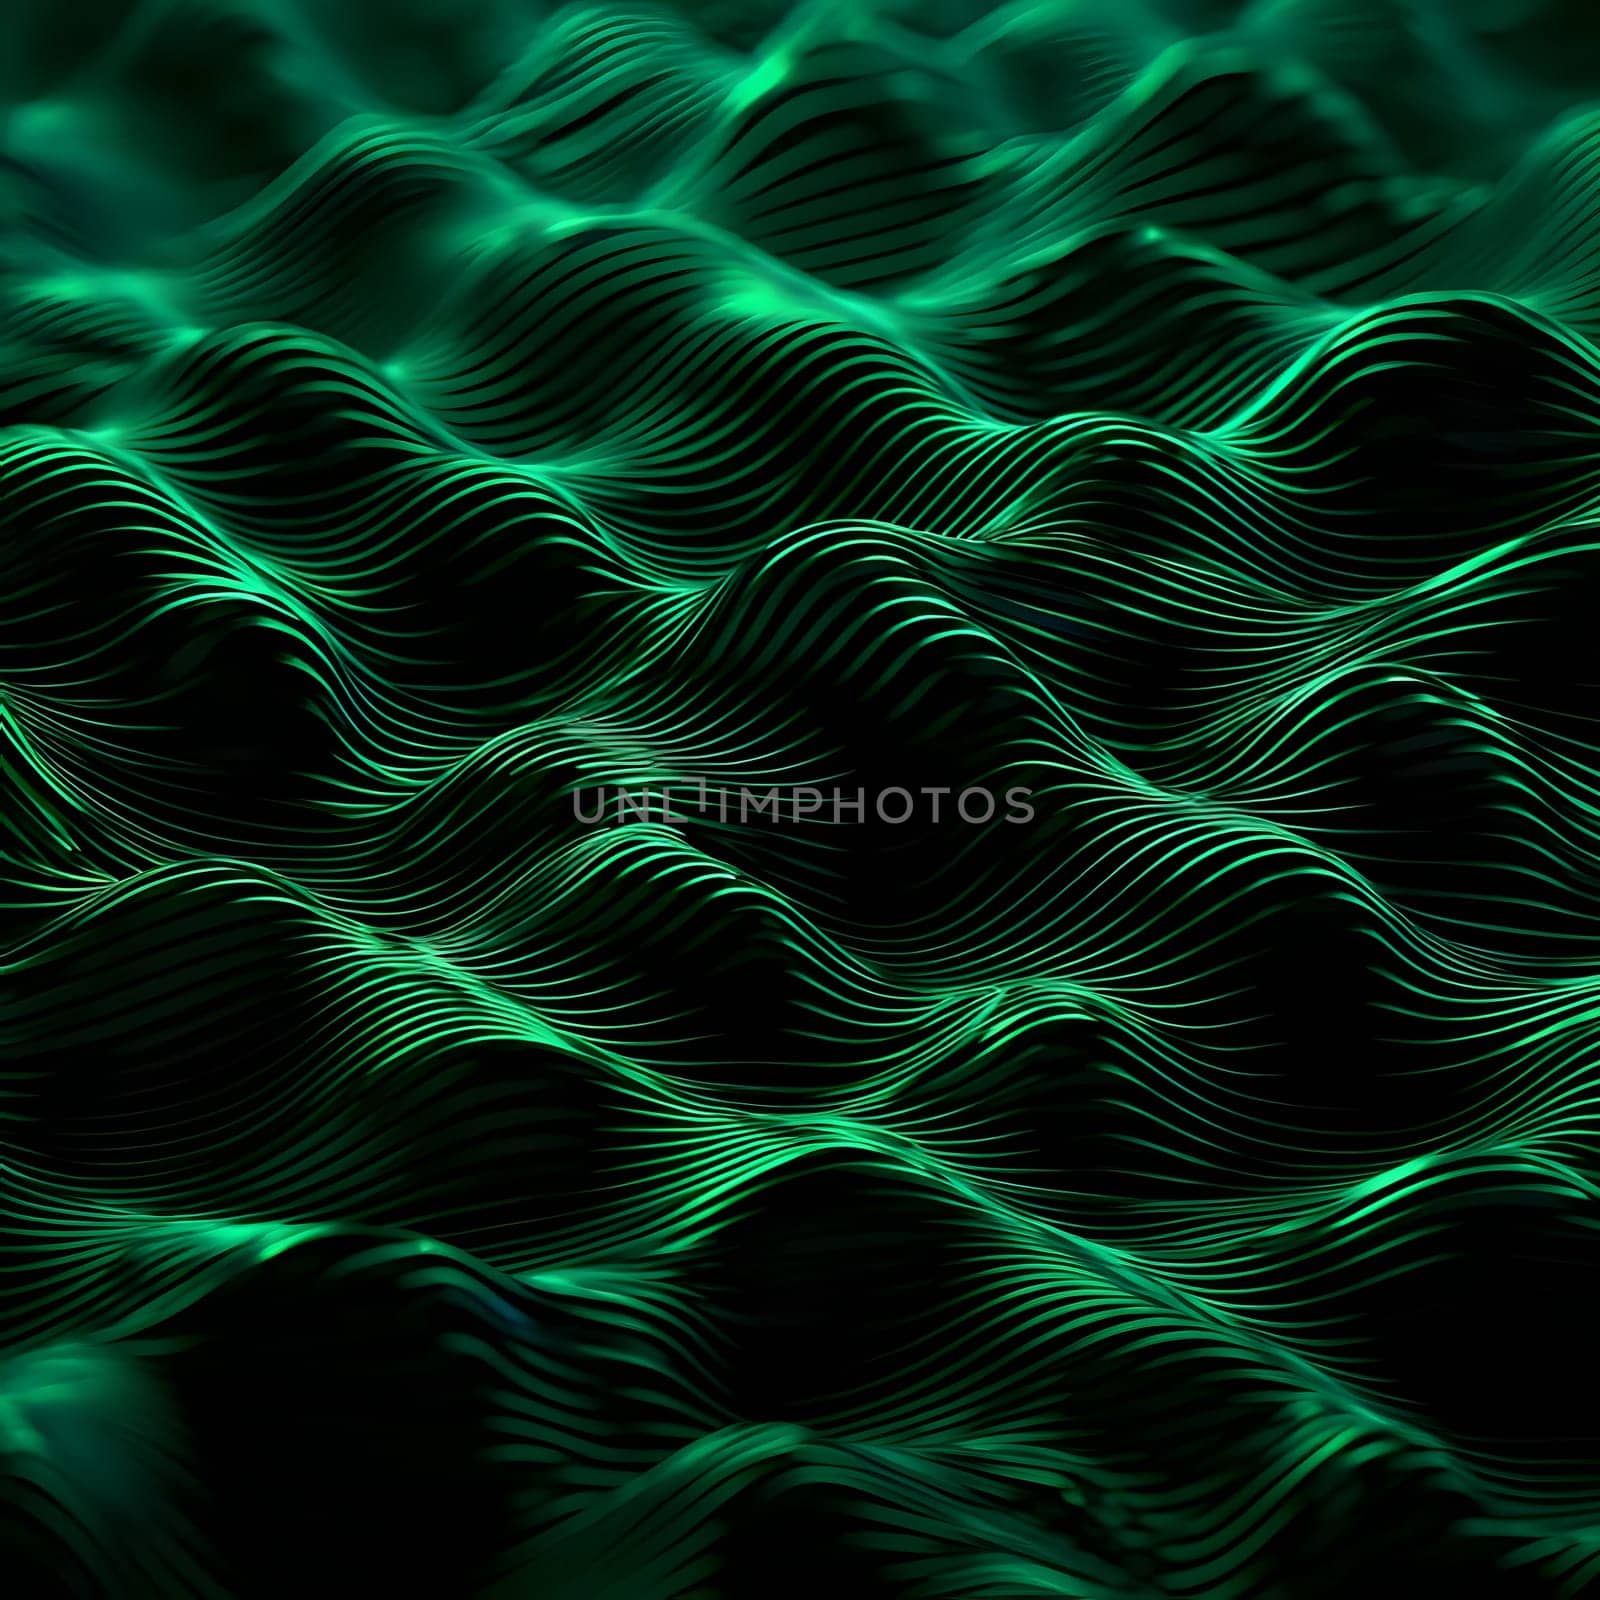 Patterns and banners backgrounds: Abstract background with green waves. 3d rendering, 3d illustration.